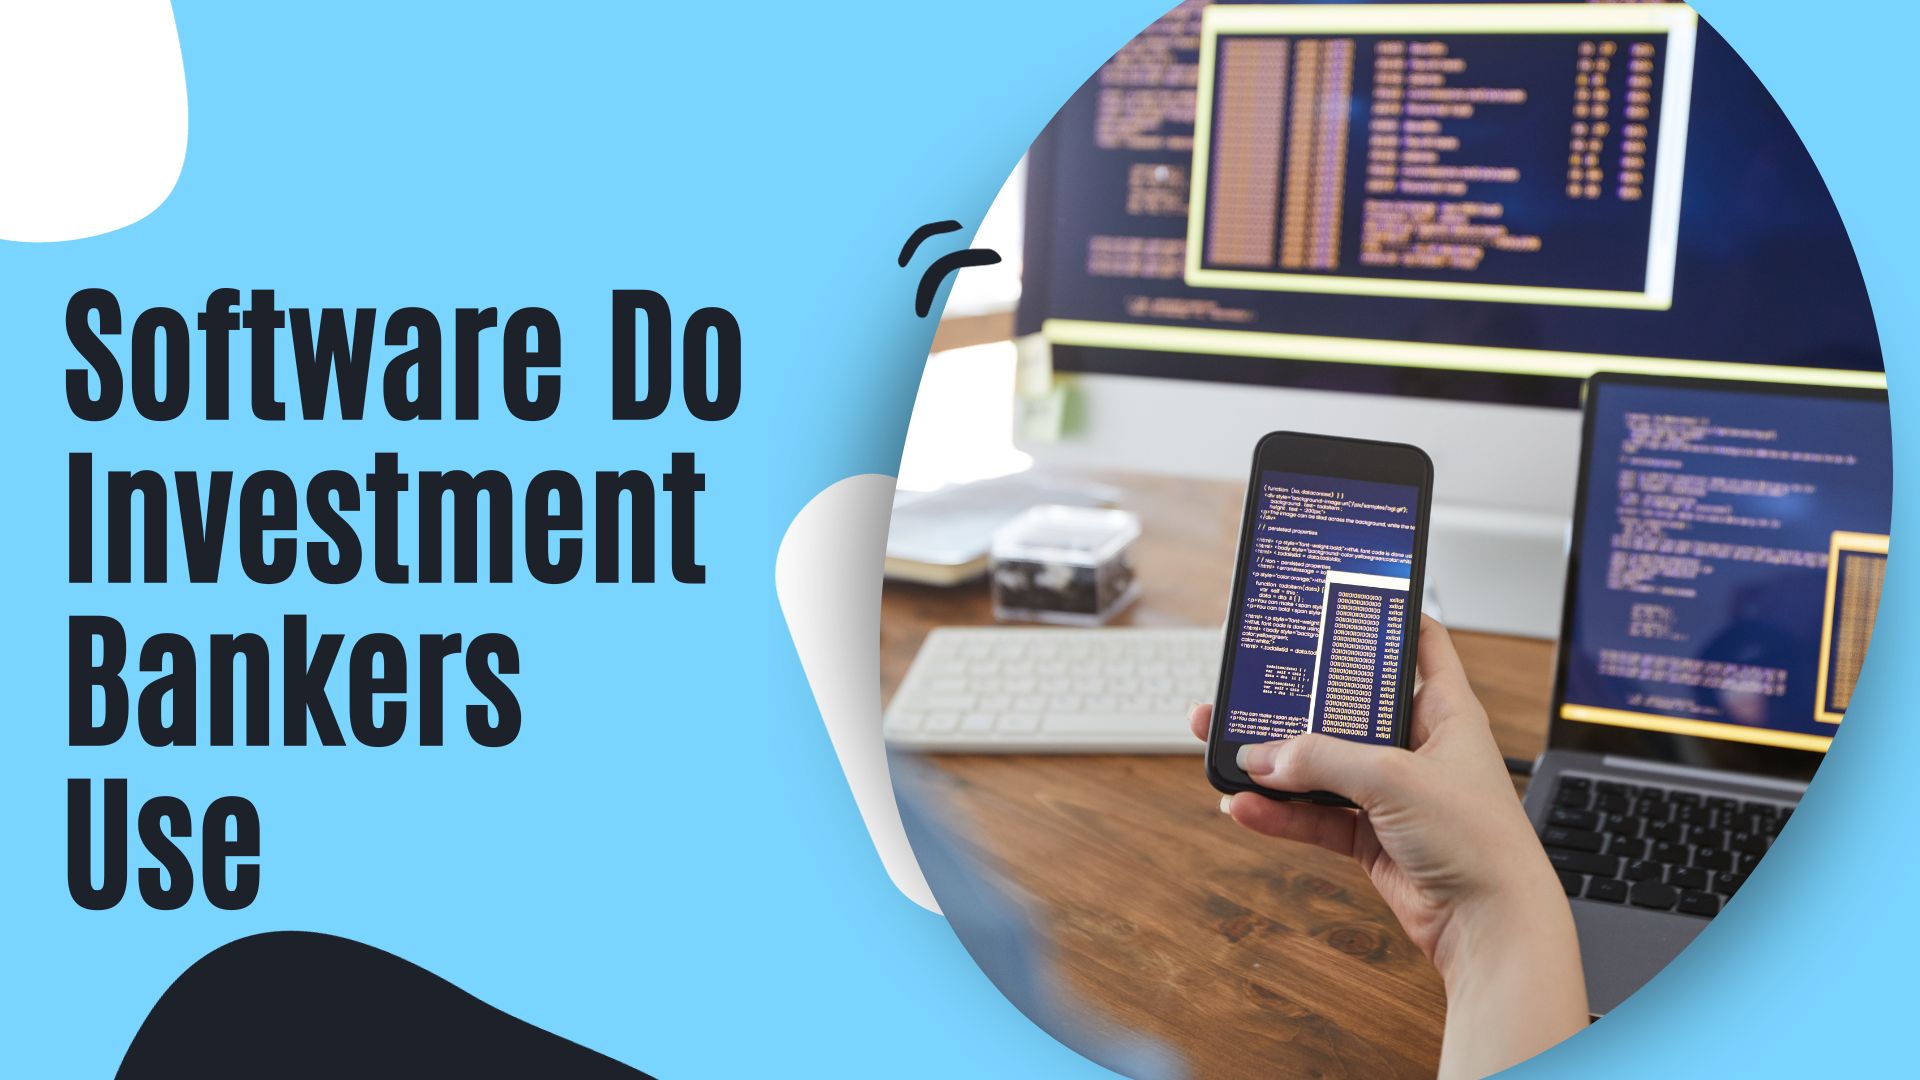 What Software Do Investment Bankers Use